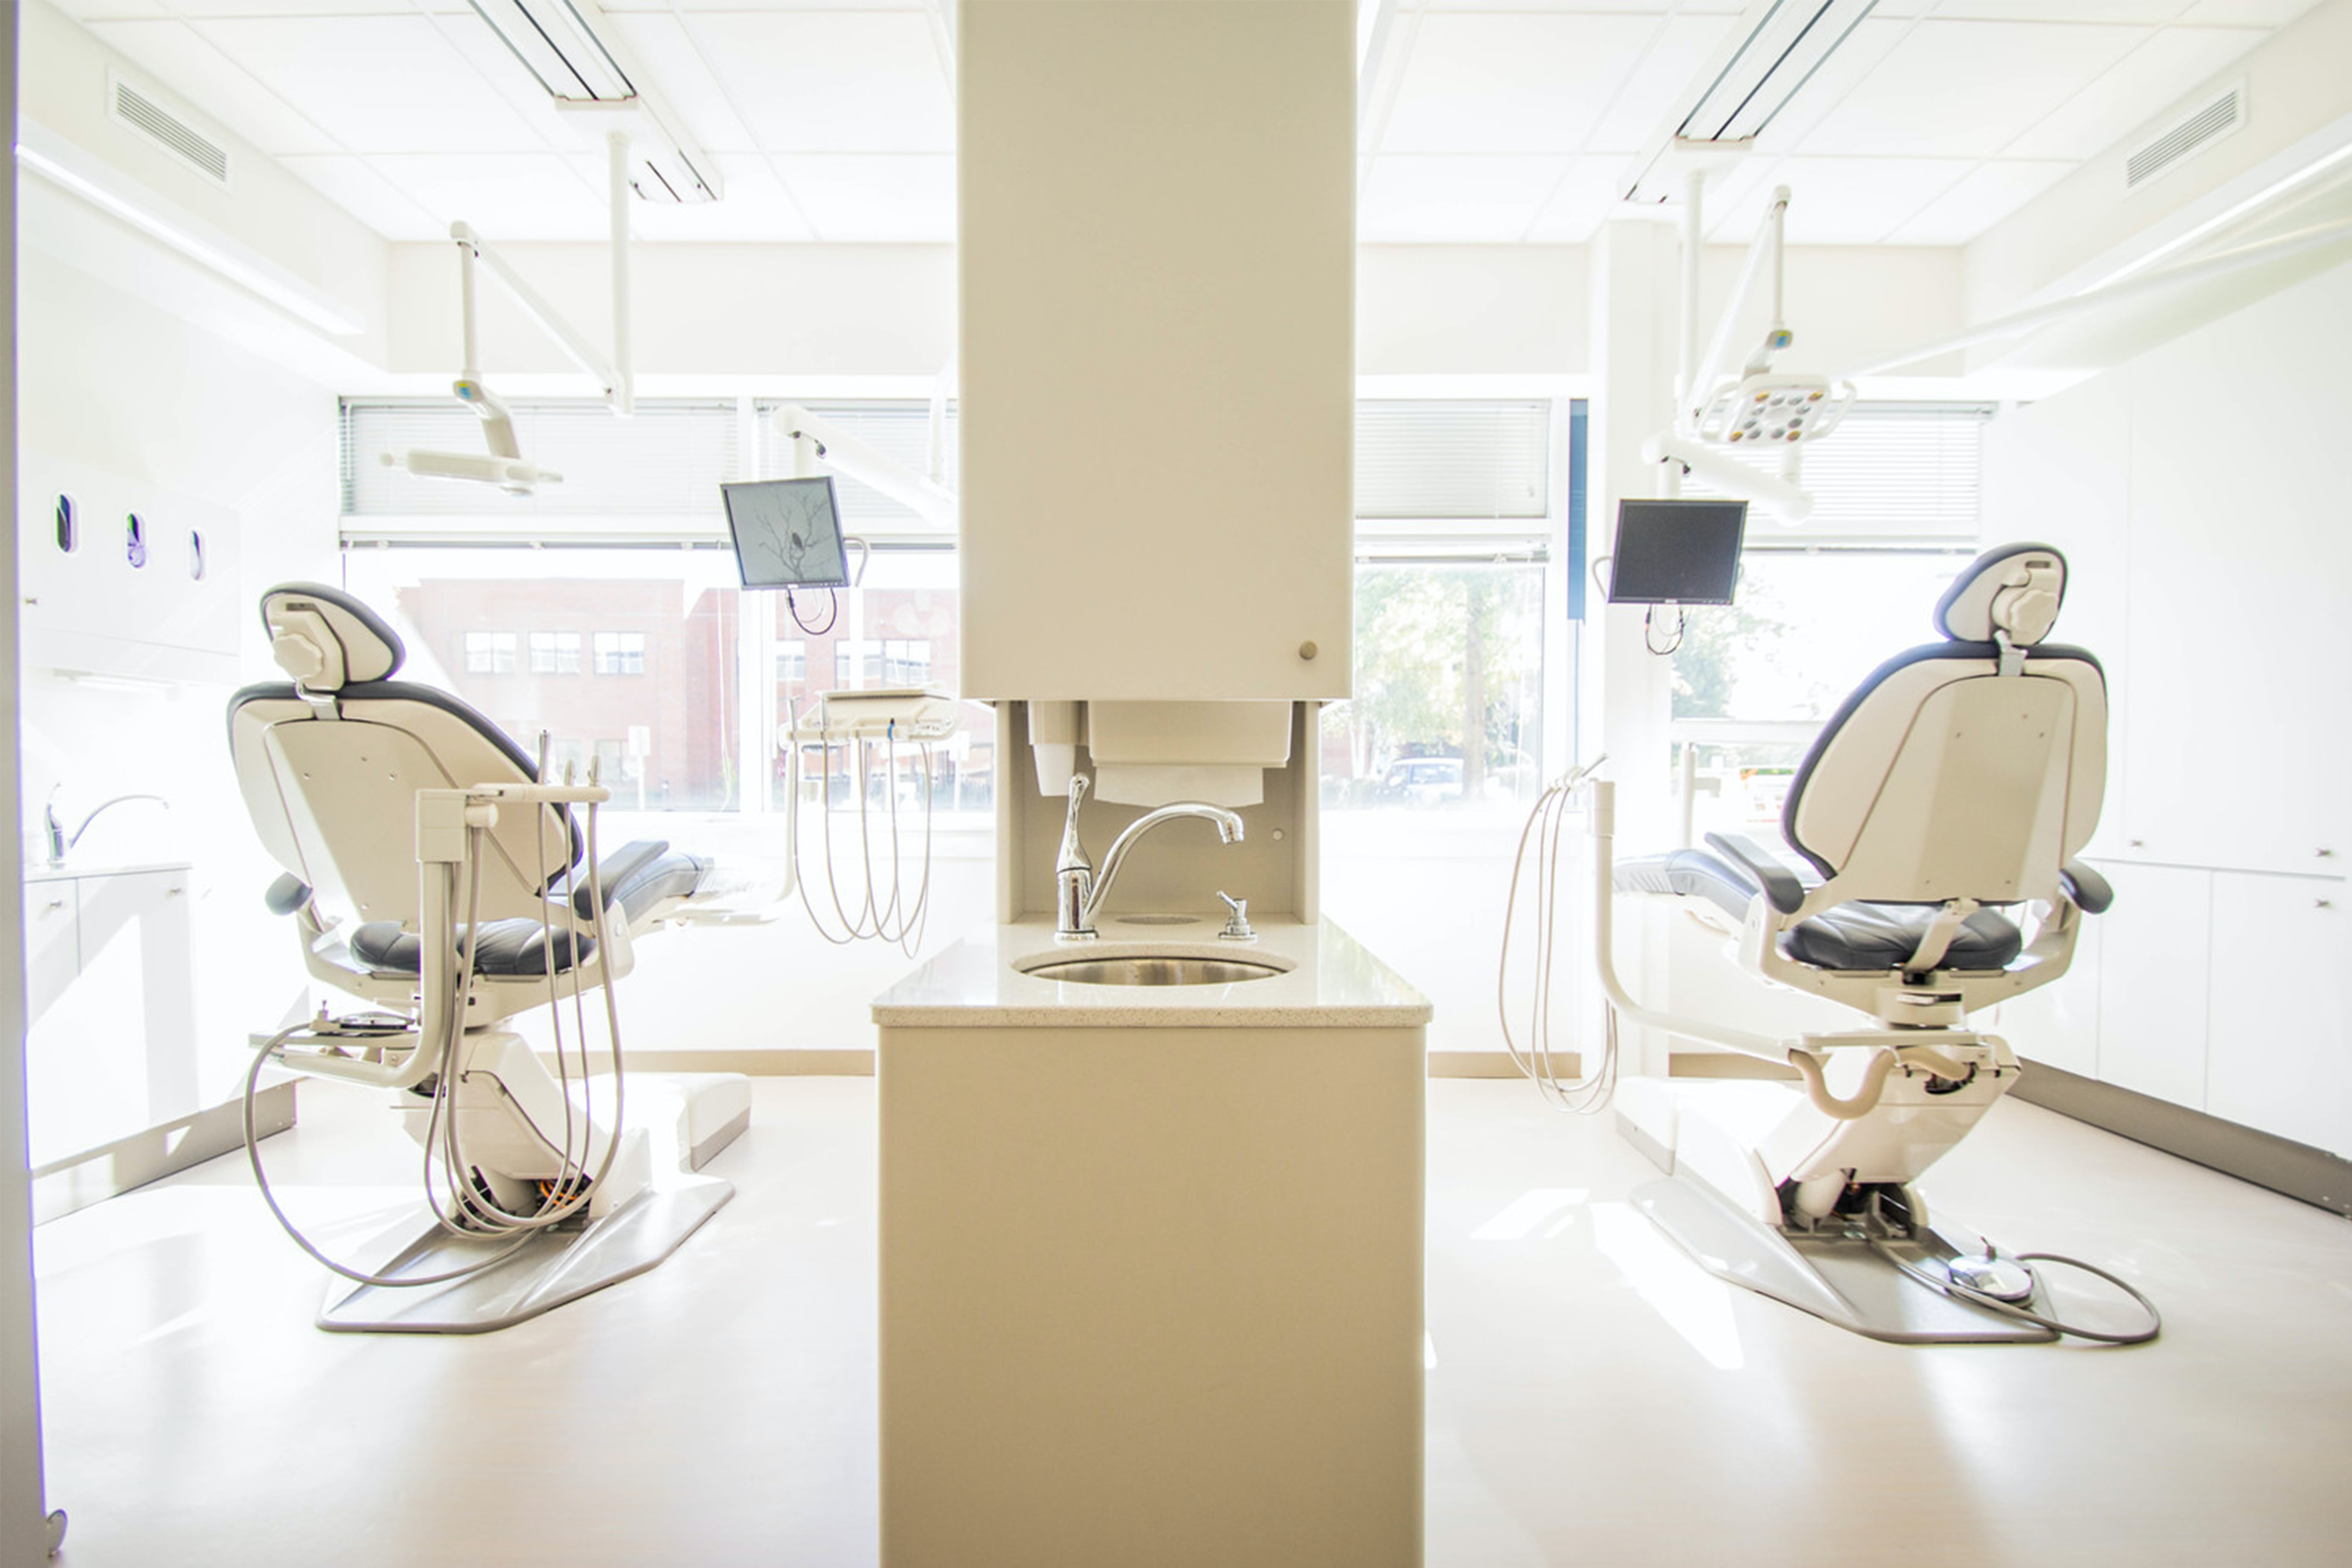 Provision of dental treatment in Tartu county